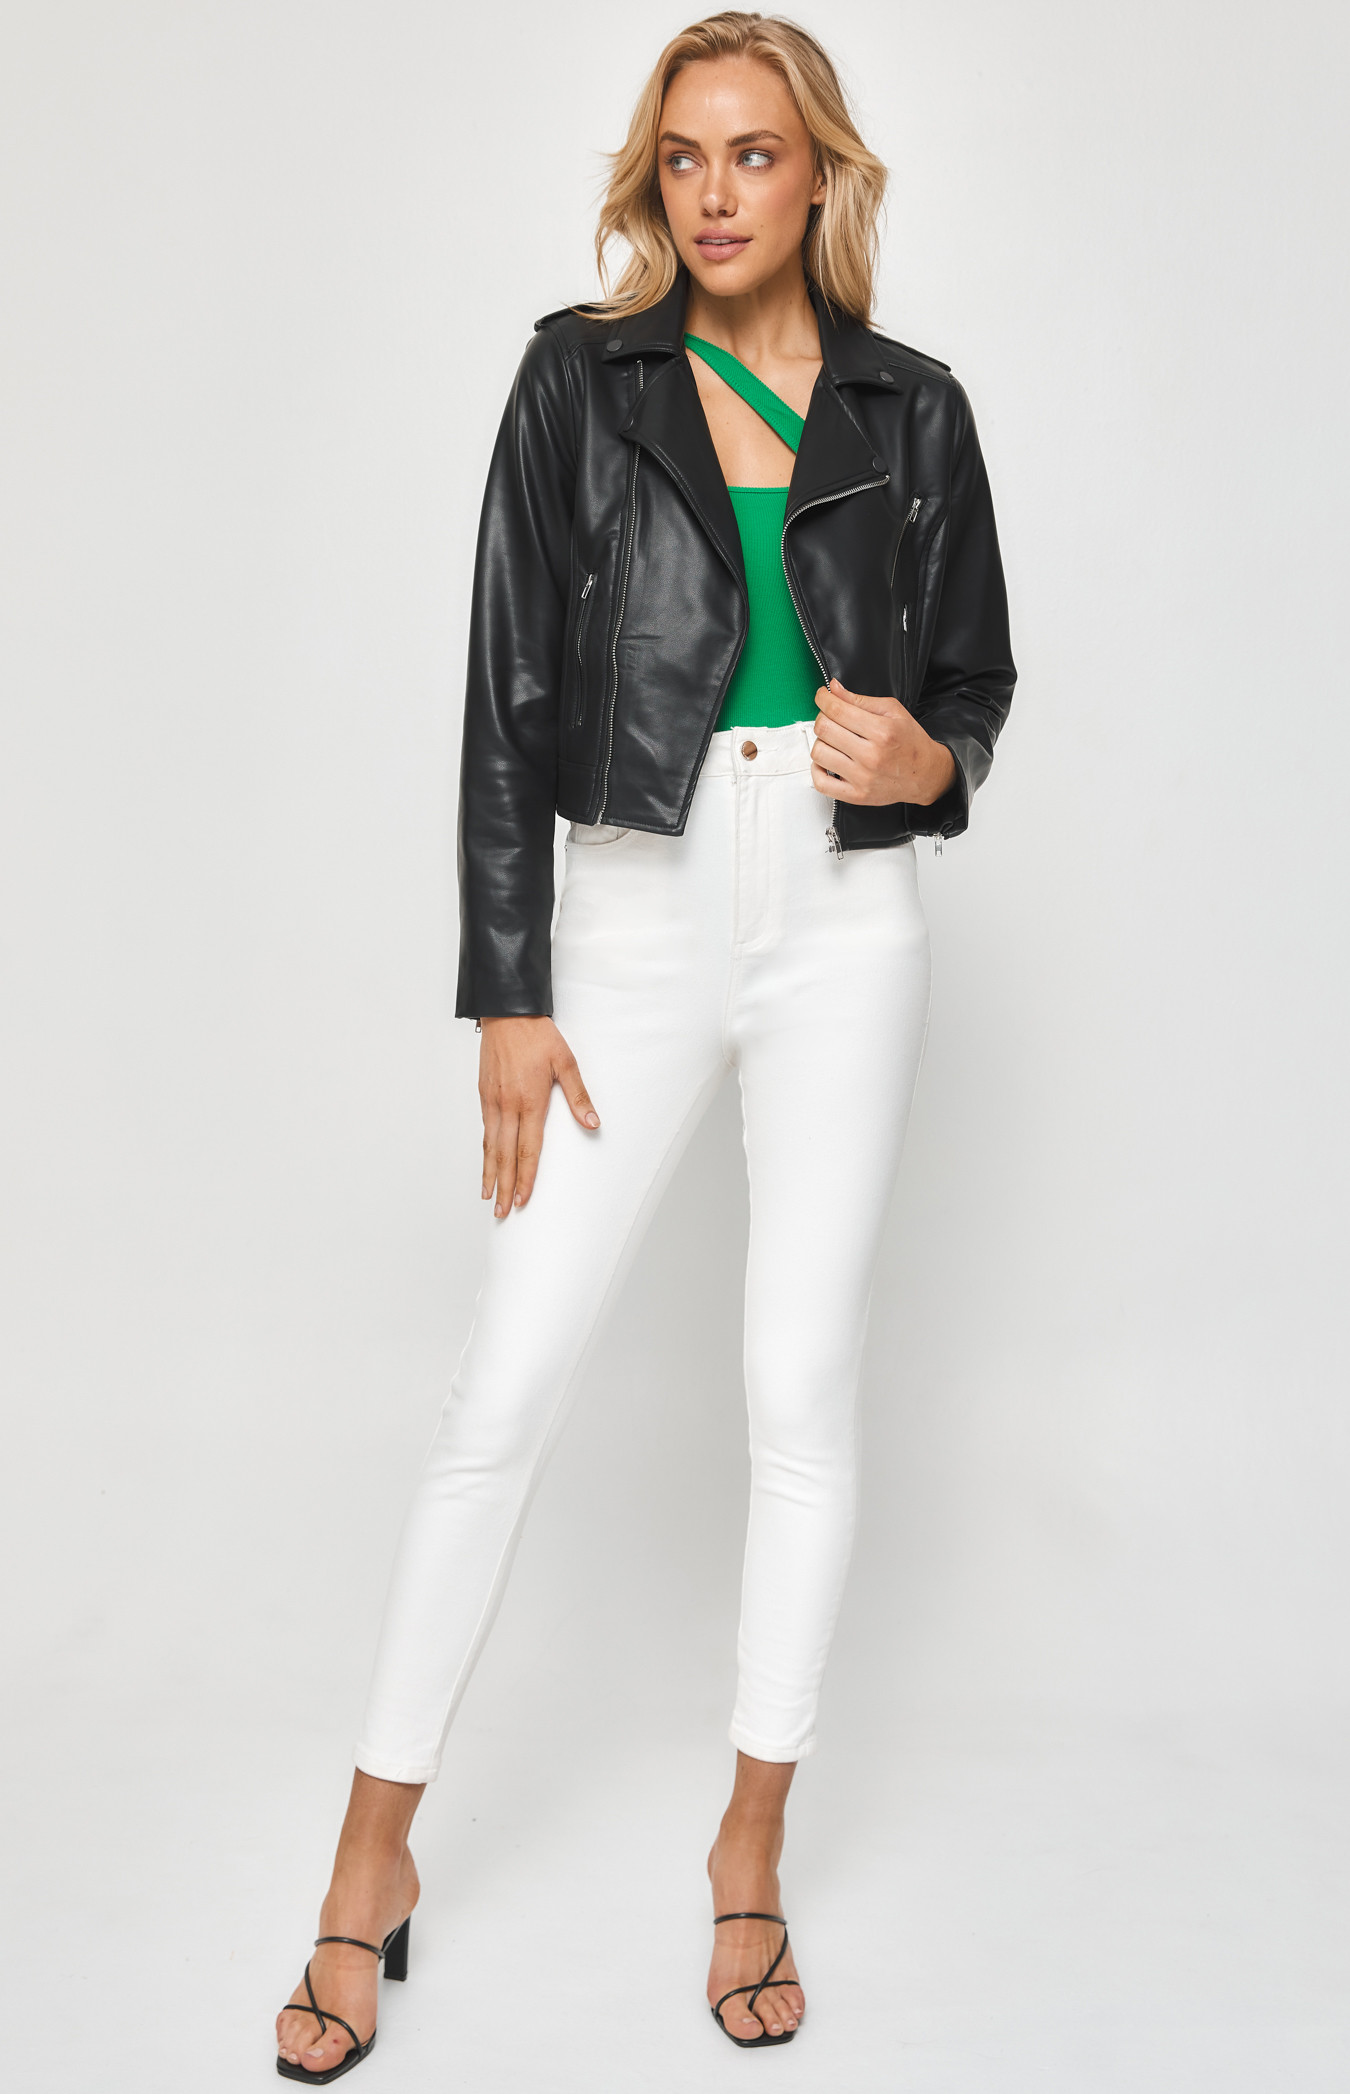 Faux Leather Jacket with Zip and Pocket Details (SJT381B)